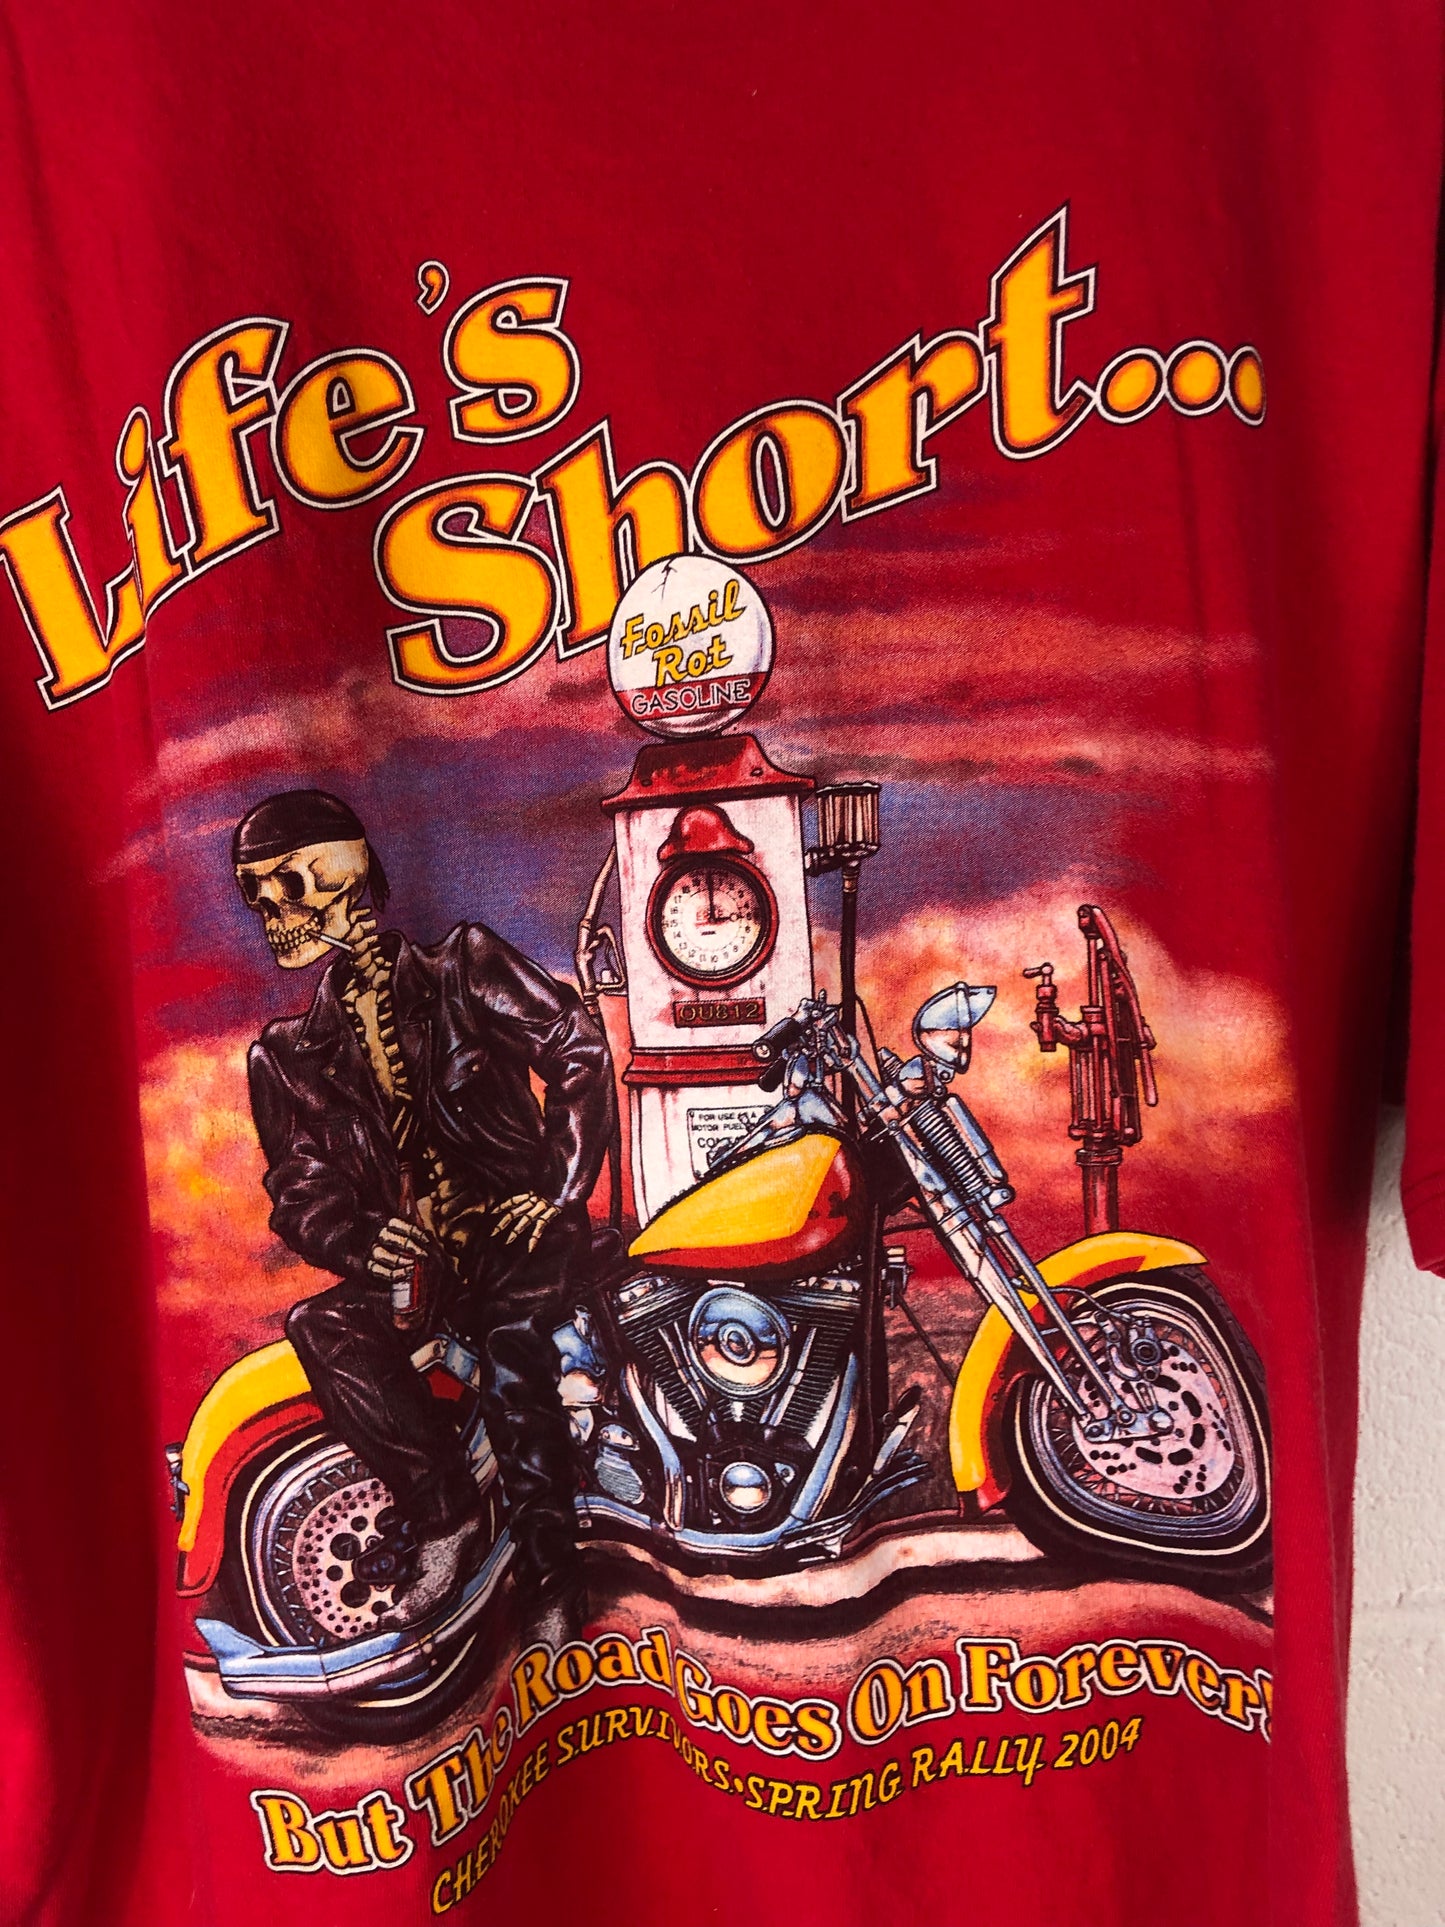 VTG Life's Short But The Road Is Forever Tee Sz XL